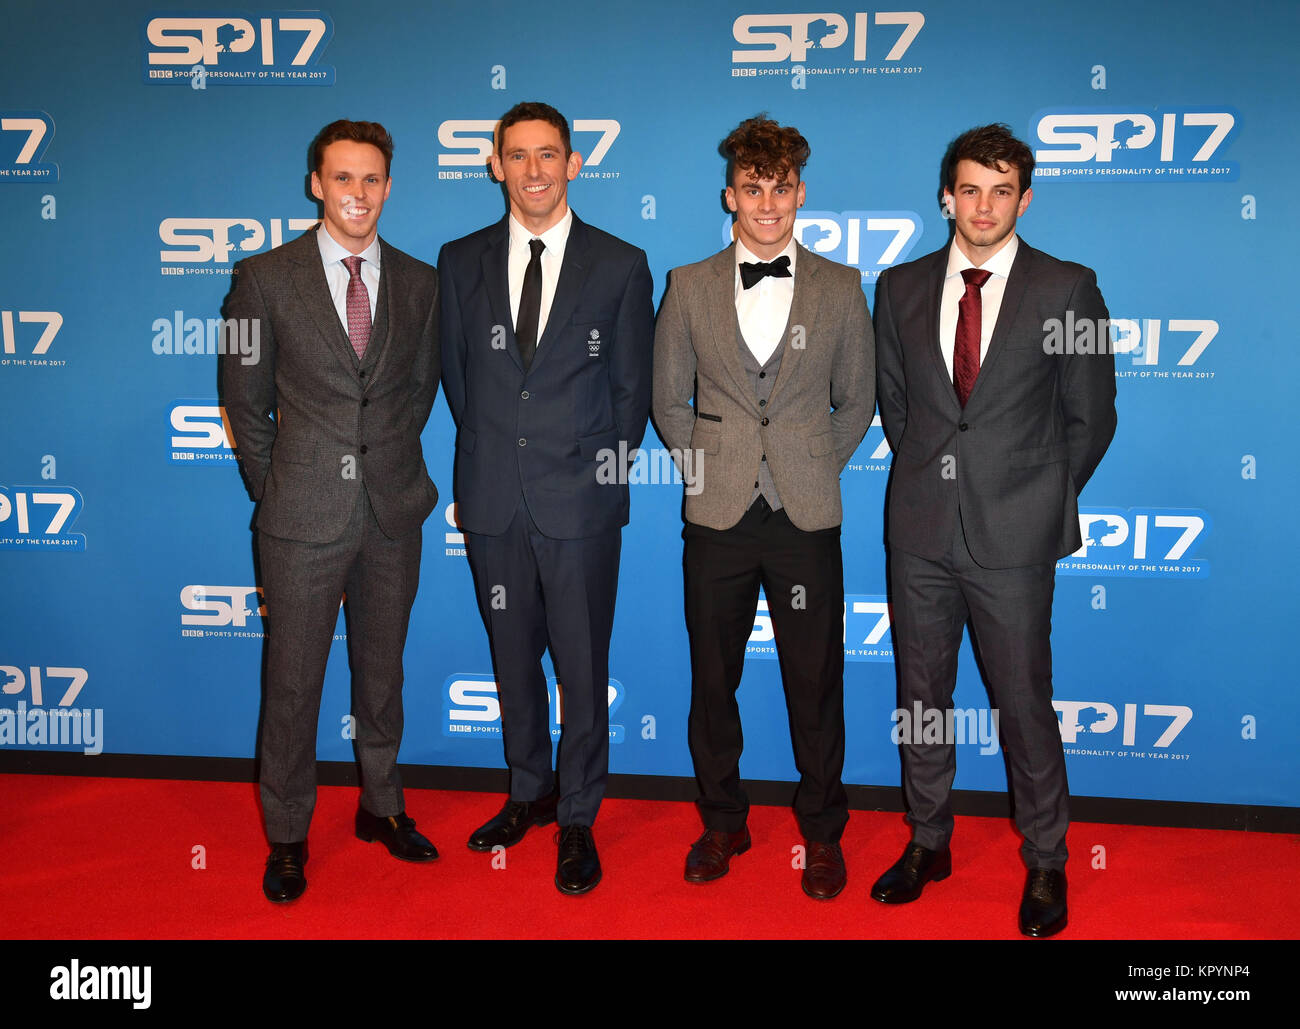 Team GB Canoeists Adam Burgess (second right), Joseph Clarke (left), David Florence (second left), and Ryan Westley (right) during the red carpet arrivals for BBC Sports Personality of the Year 2017 at the Liverpool Echo Arena. Stock Photo